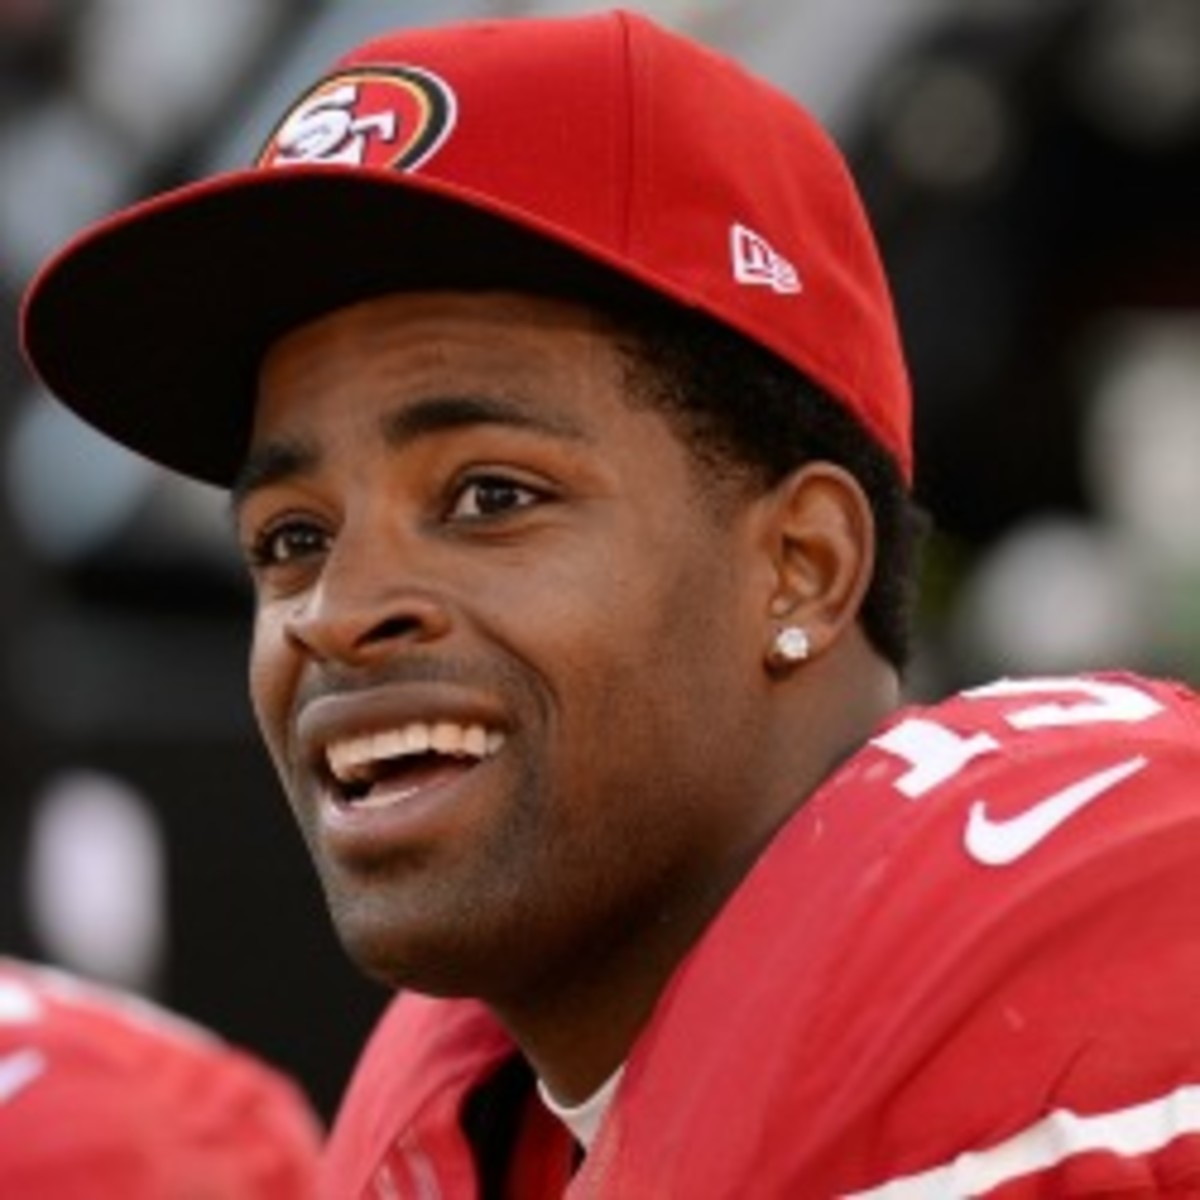 49ers receiver Michael Crabtree was investigated for an alleged sexual assault at a San Francisco hotel on Jan. 13. (Thearon W. Henderson/Getty Images)